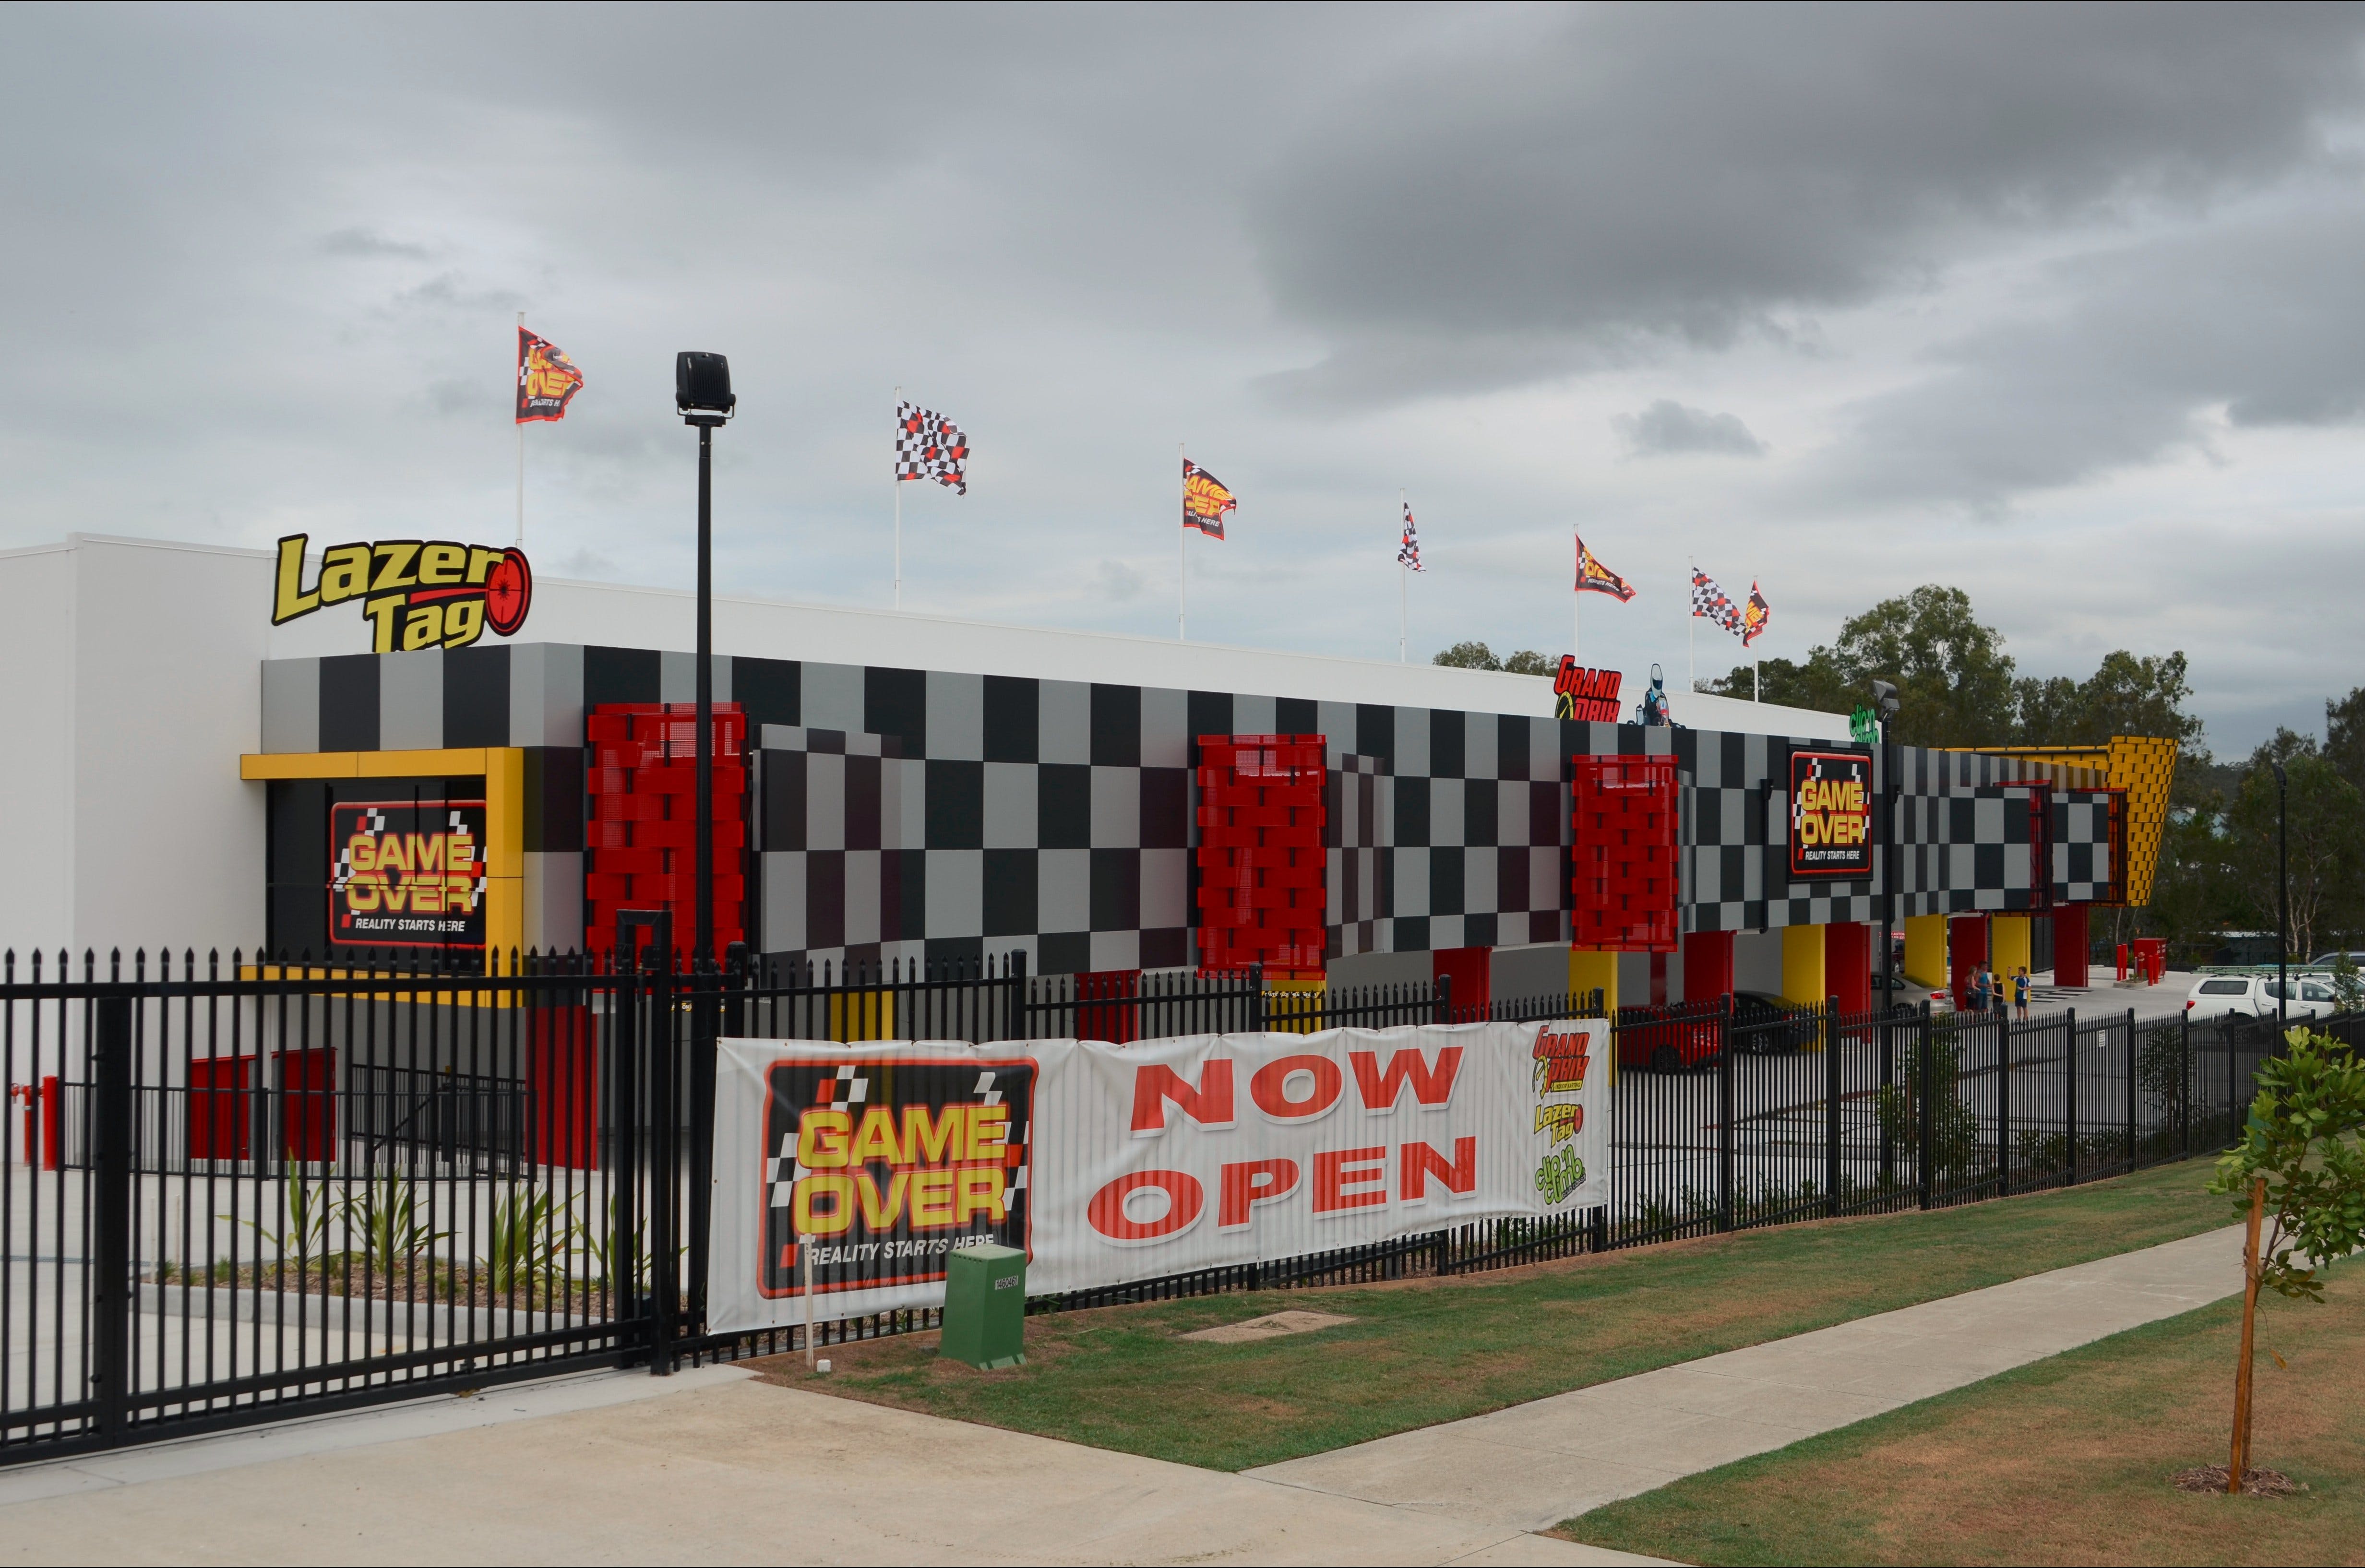 Game Over Indoor Go Karting Adventure Climbing Walls and Lazer Tag Centre - Attractions Melbourne